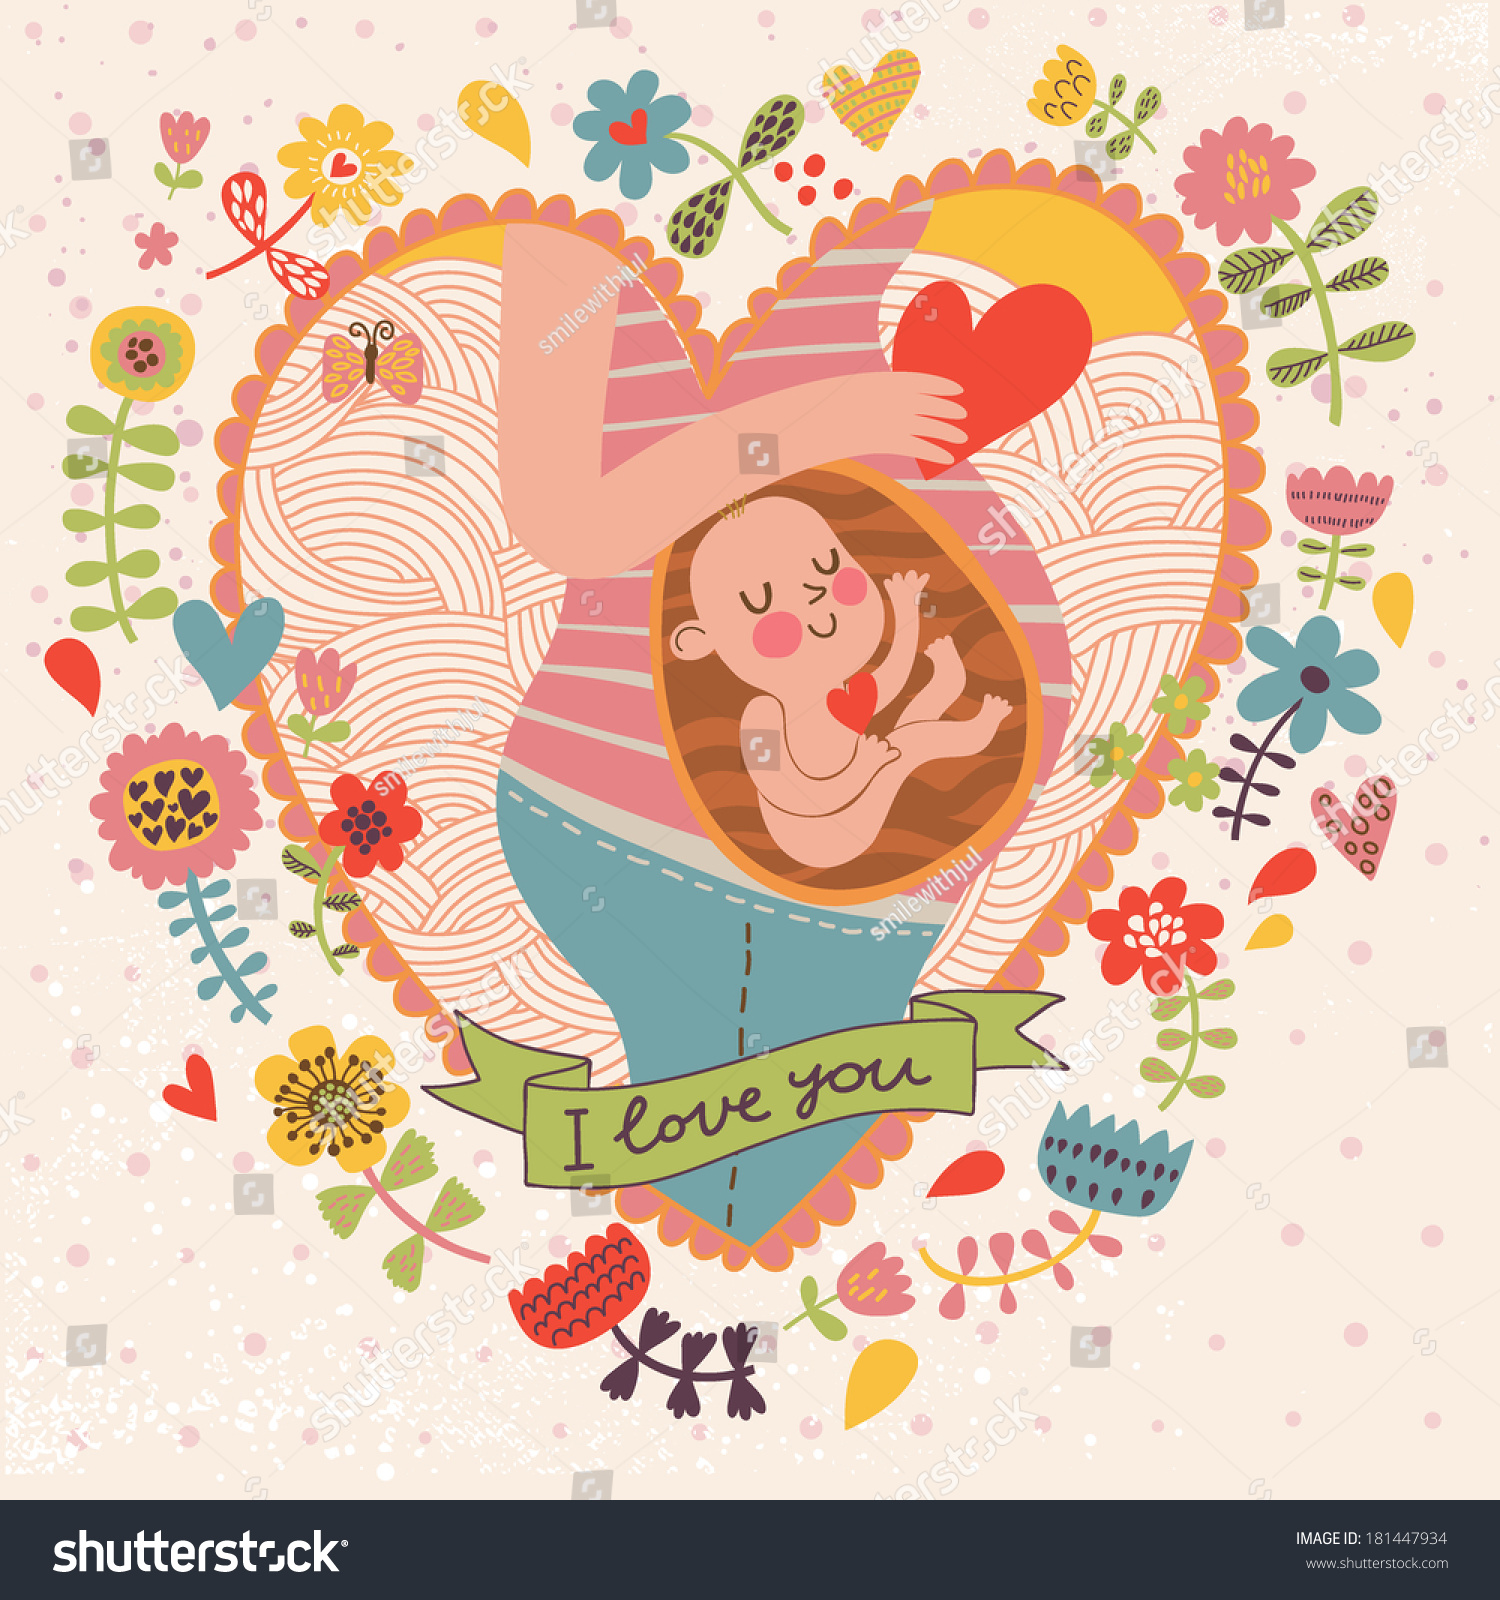 free clipart baby in womb - photo #36